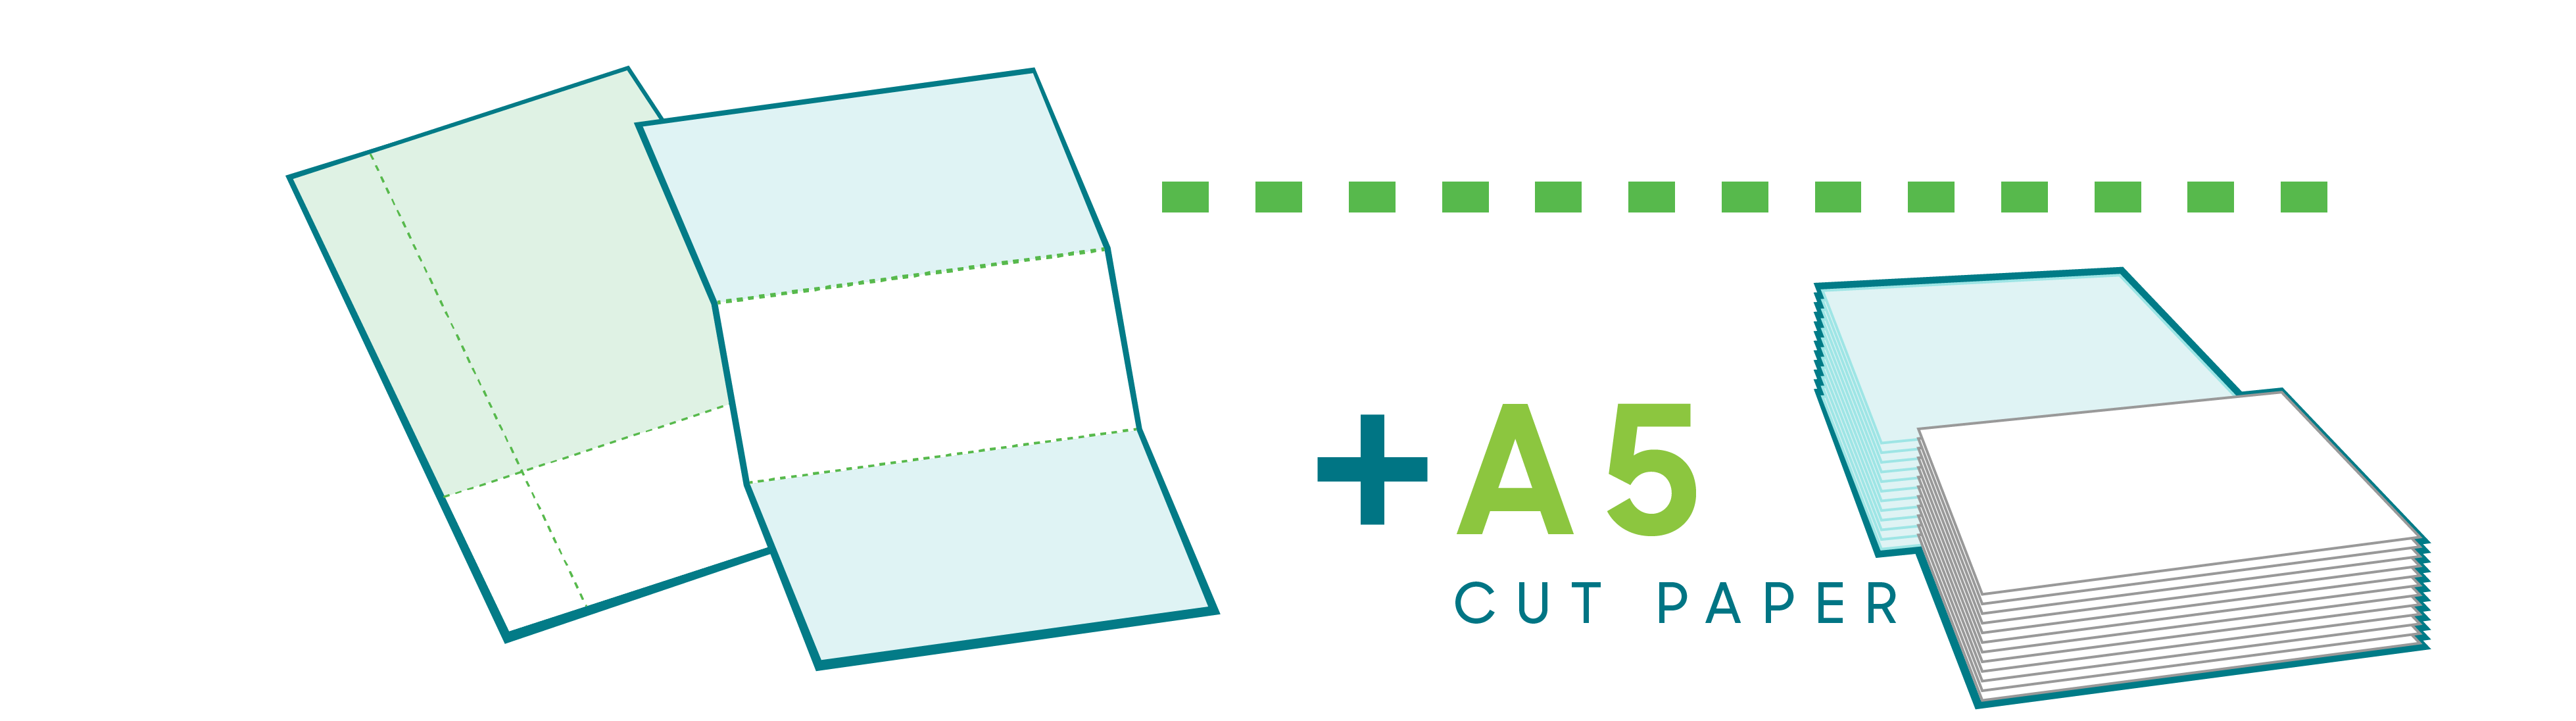 perforated-paper-A5-Paper-slide_1-01.png